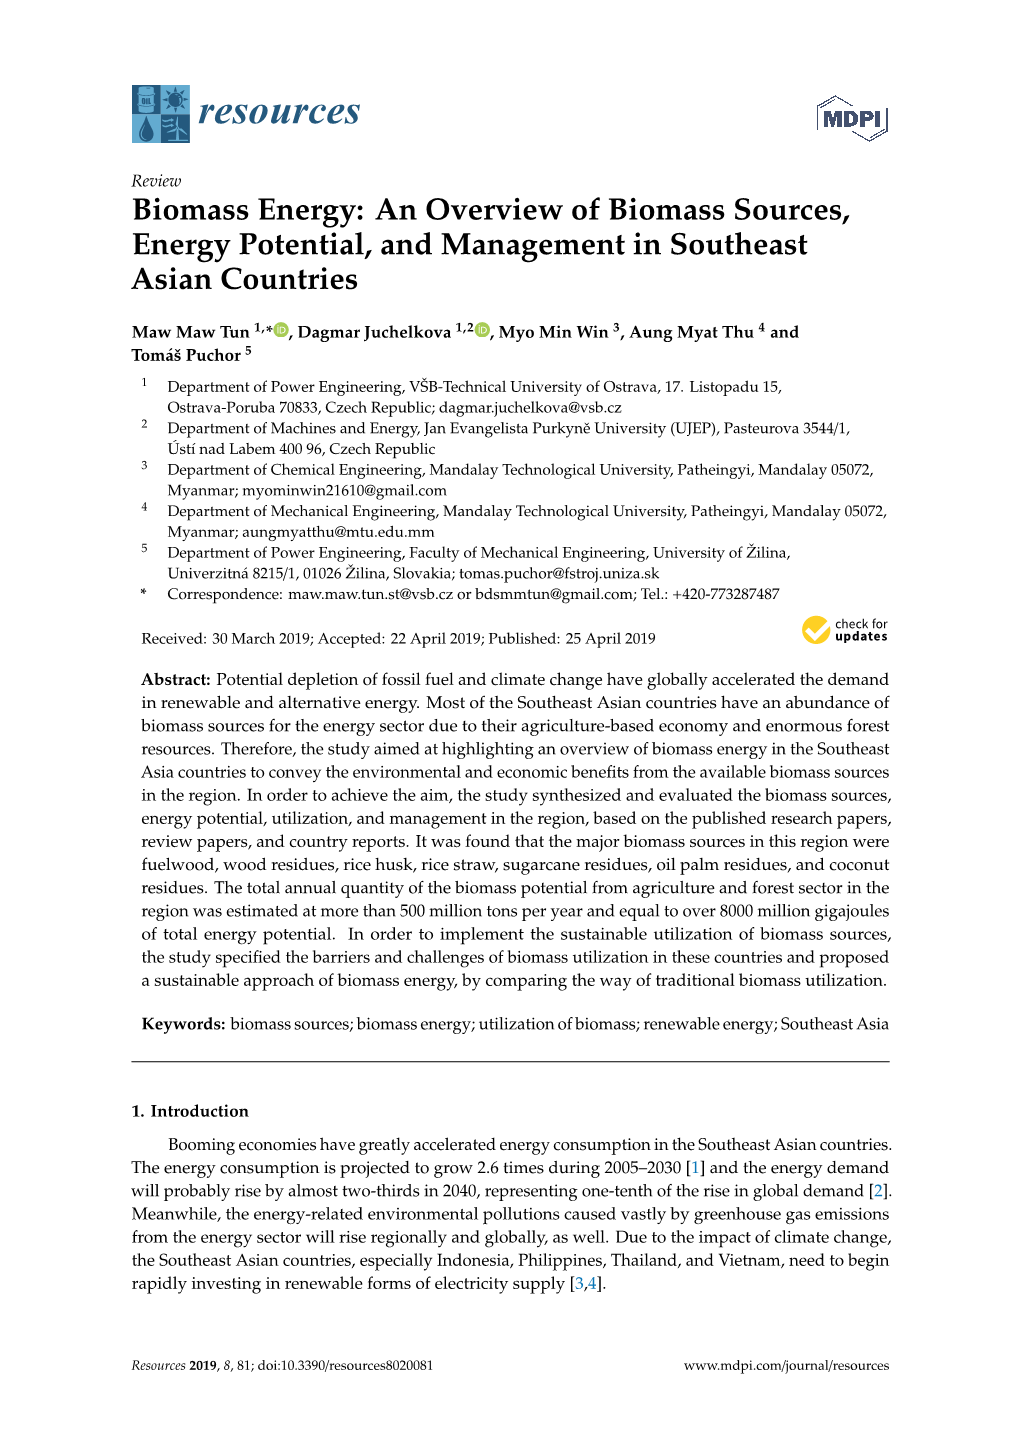 An Overview of Biomass Sources, Energy Potential, and Management in Southeast Asian Countries